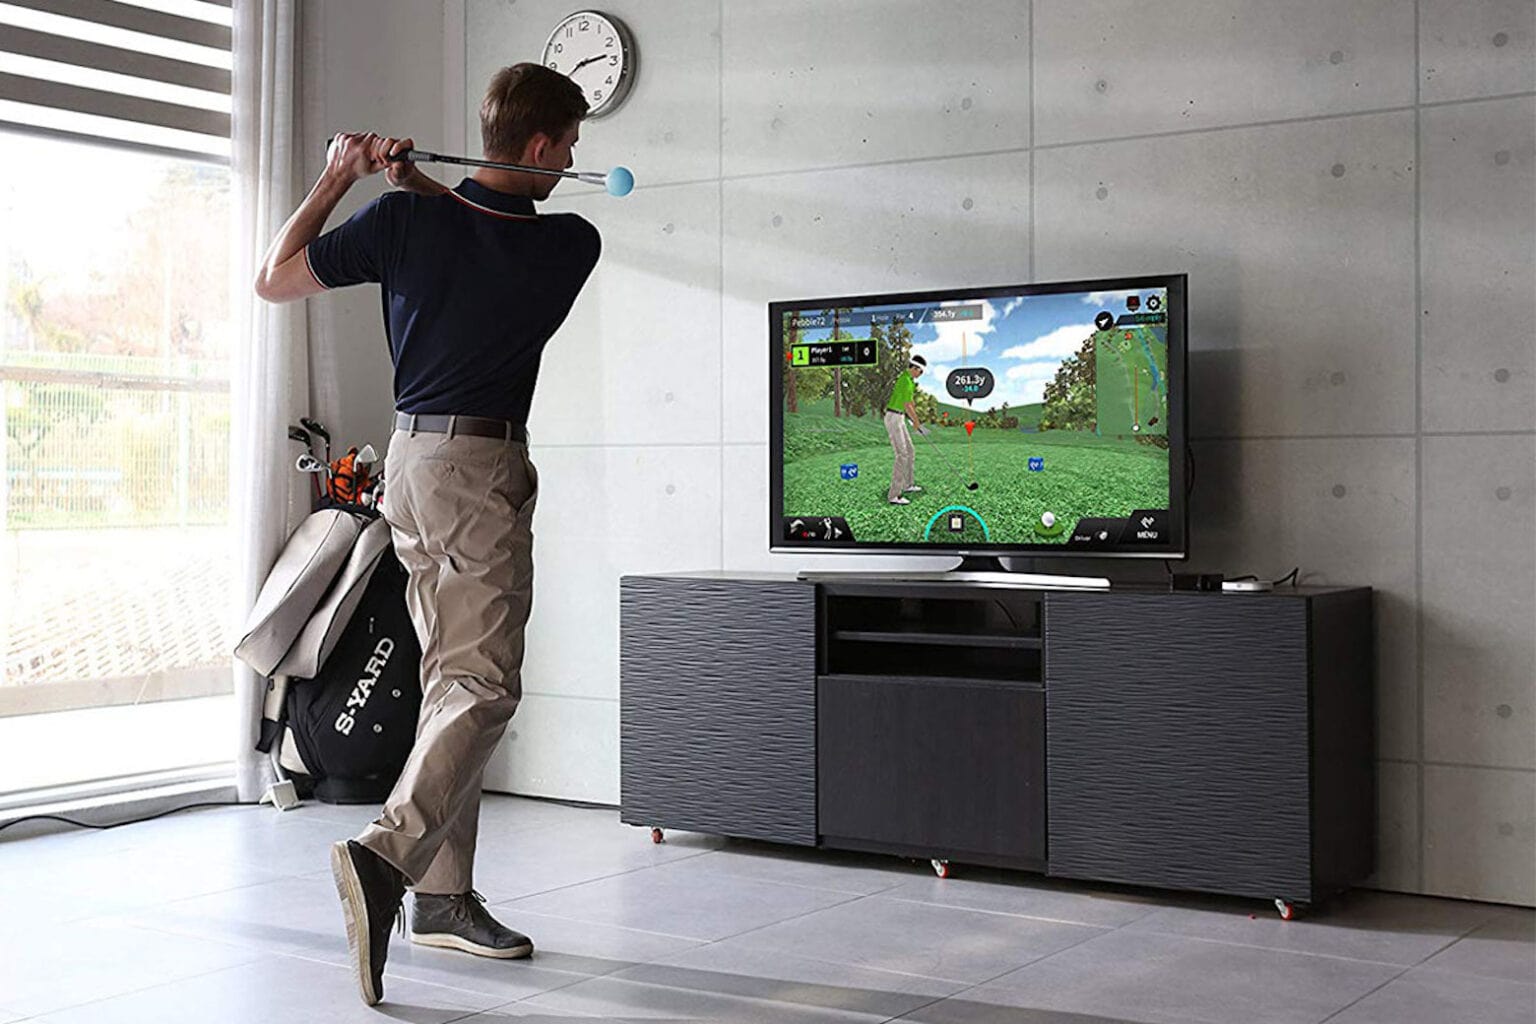 The PhiGolf- Mobile & Home Smart Golf Simulator with Swing Stick: This golf simulator is the perfect indoor activity for fans of the game.